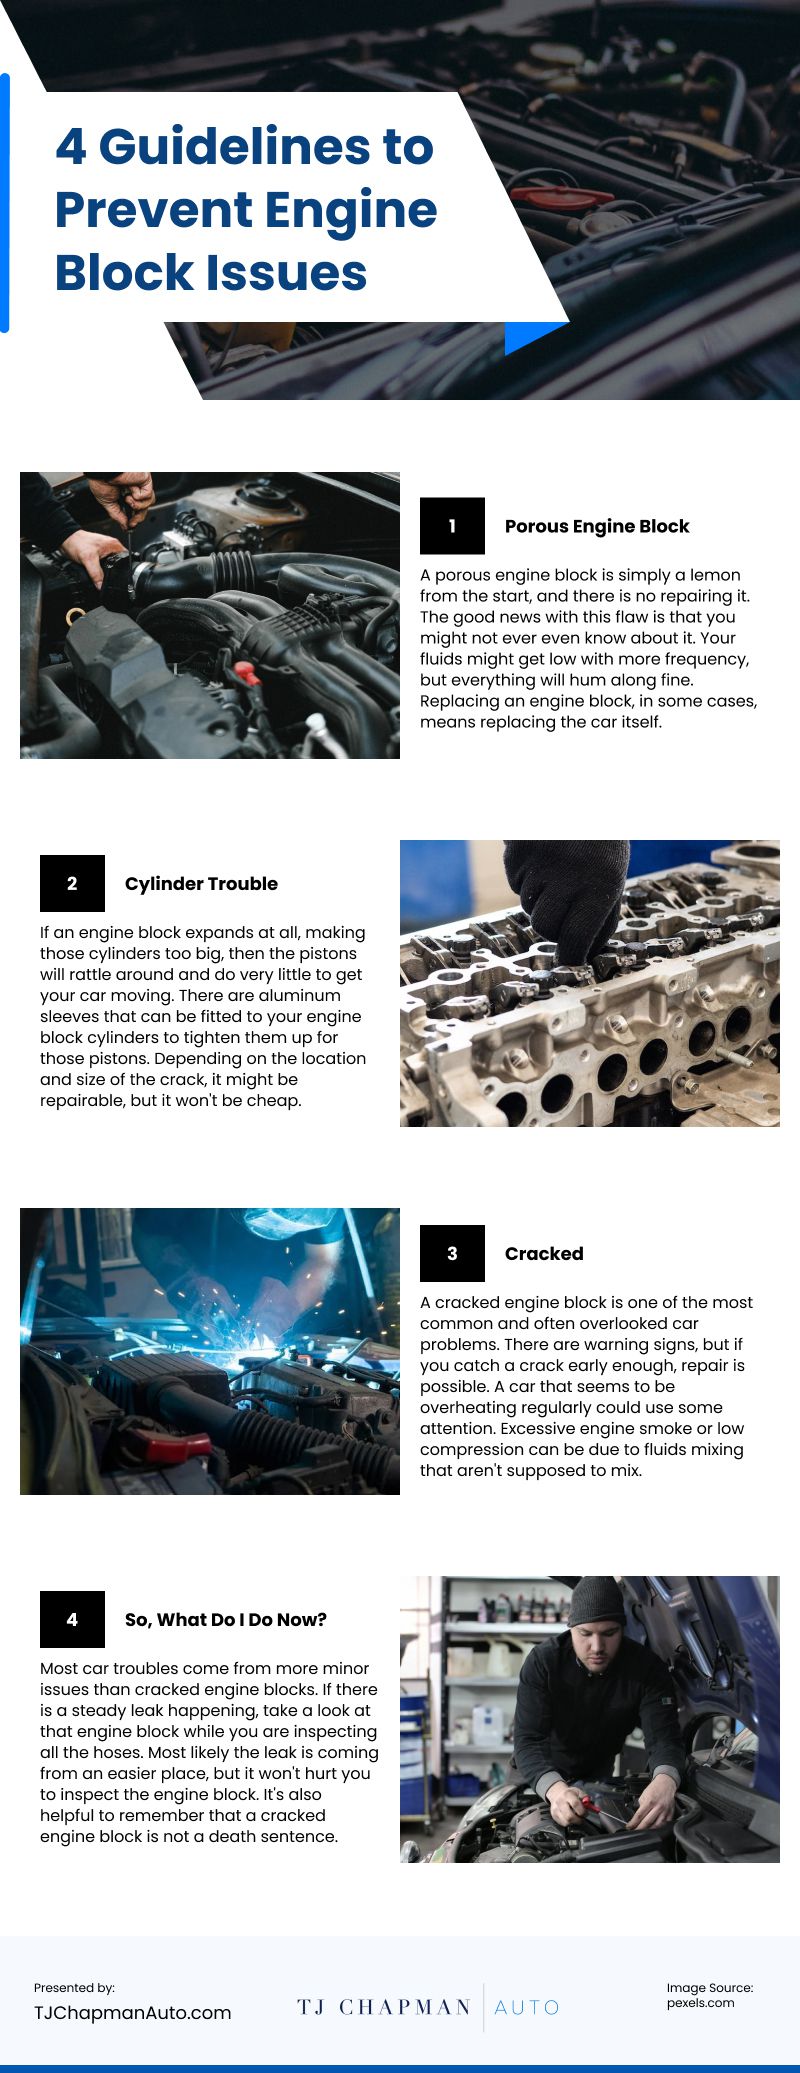 4 Guidelines to Prevent Engine Block Issues Infographic